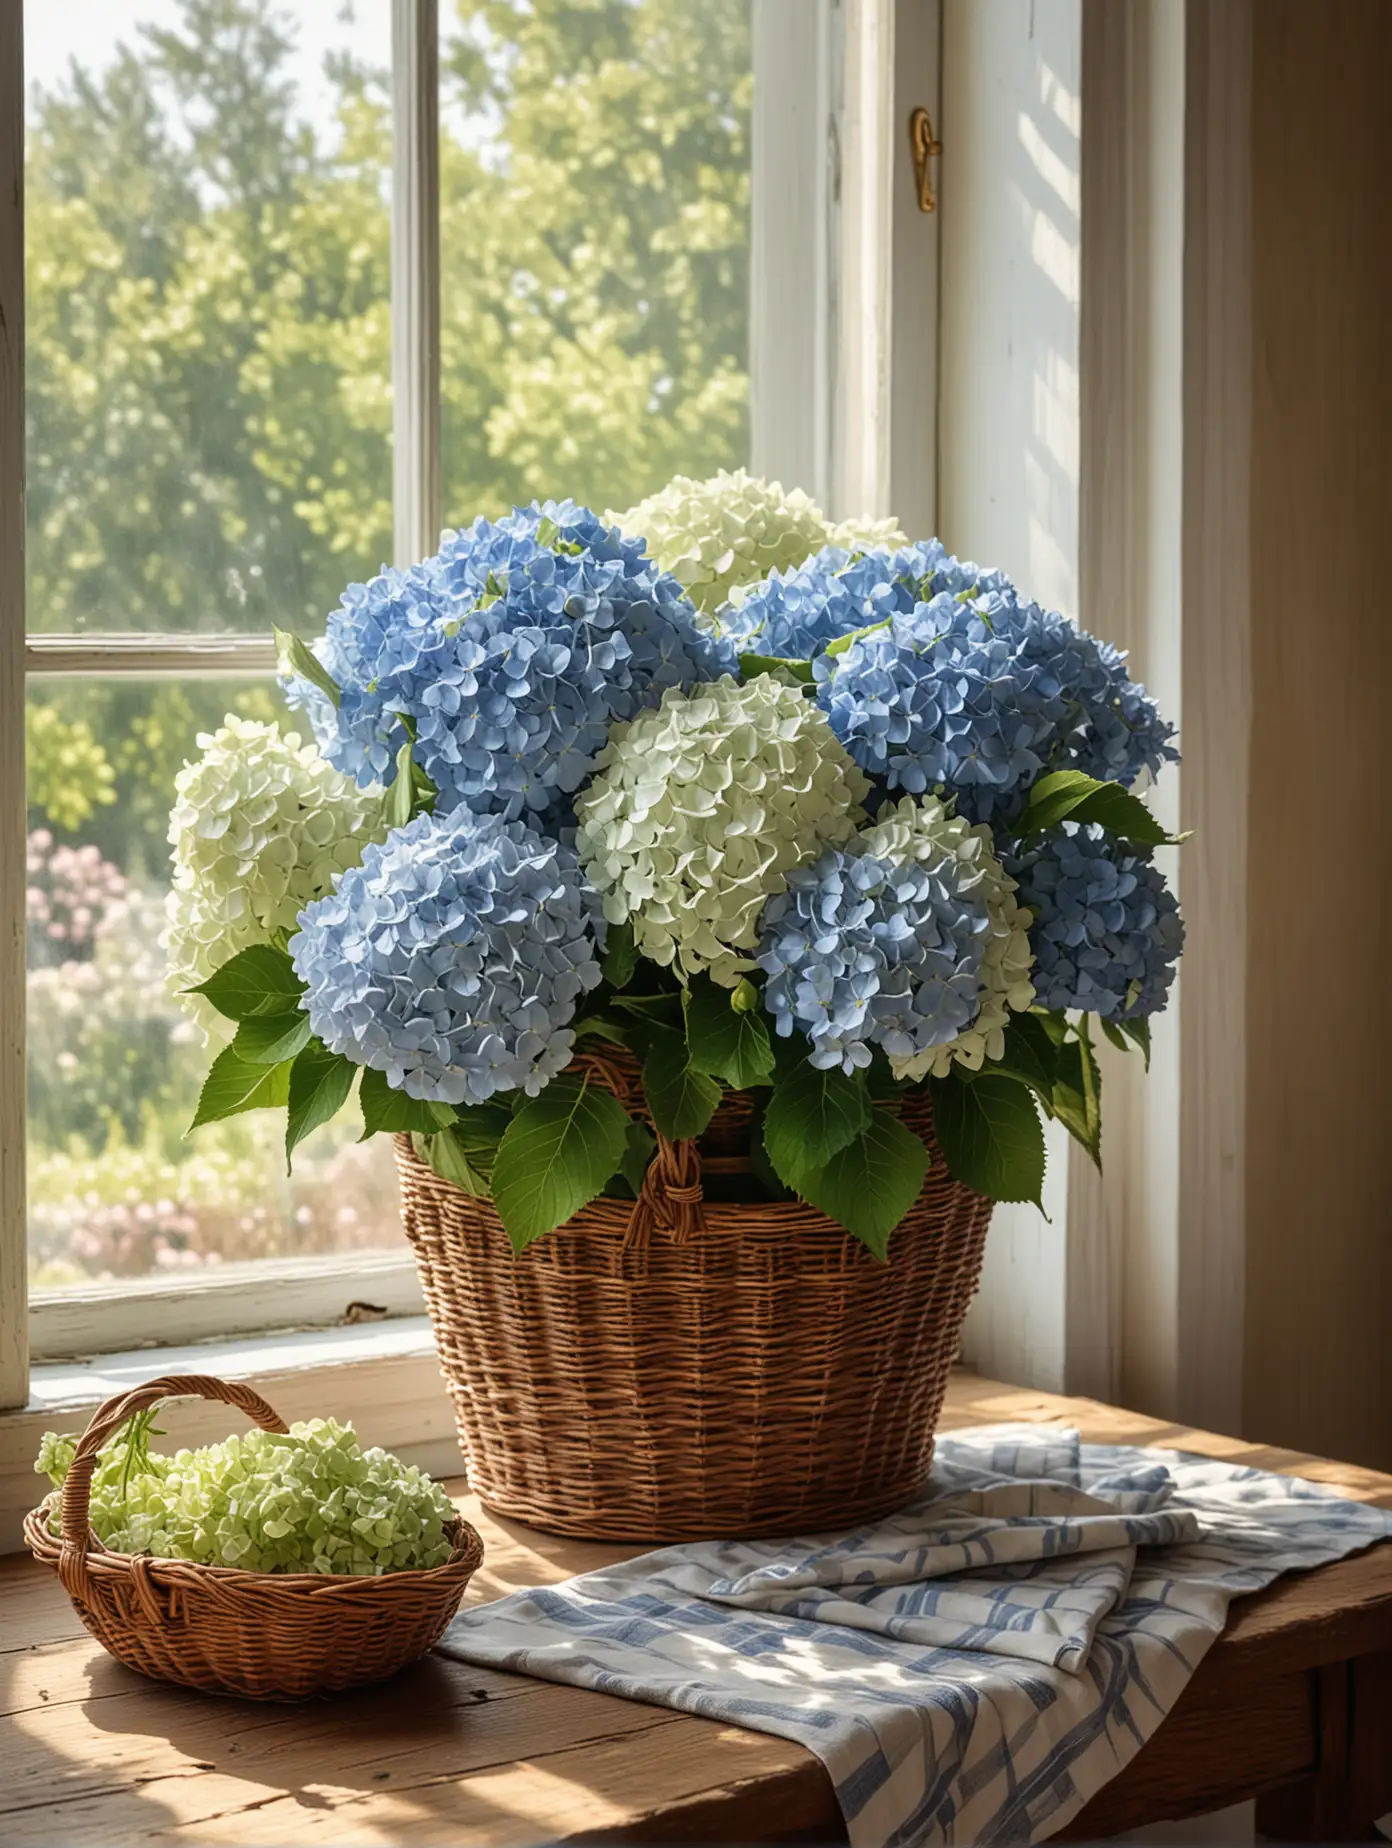 in style of van gogh painting create an image of a basket of cut hydrangeas on a country table next a wall and window with morning sunlight coming in with cutting accessories and other accessories to make a still life image